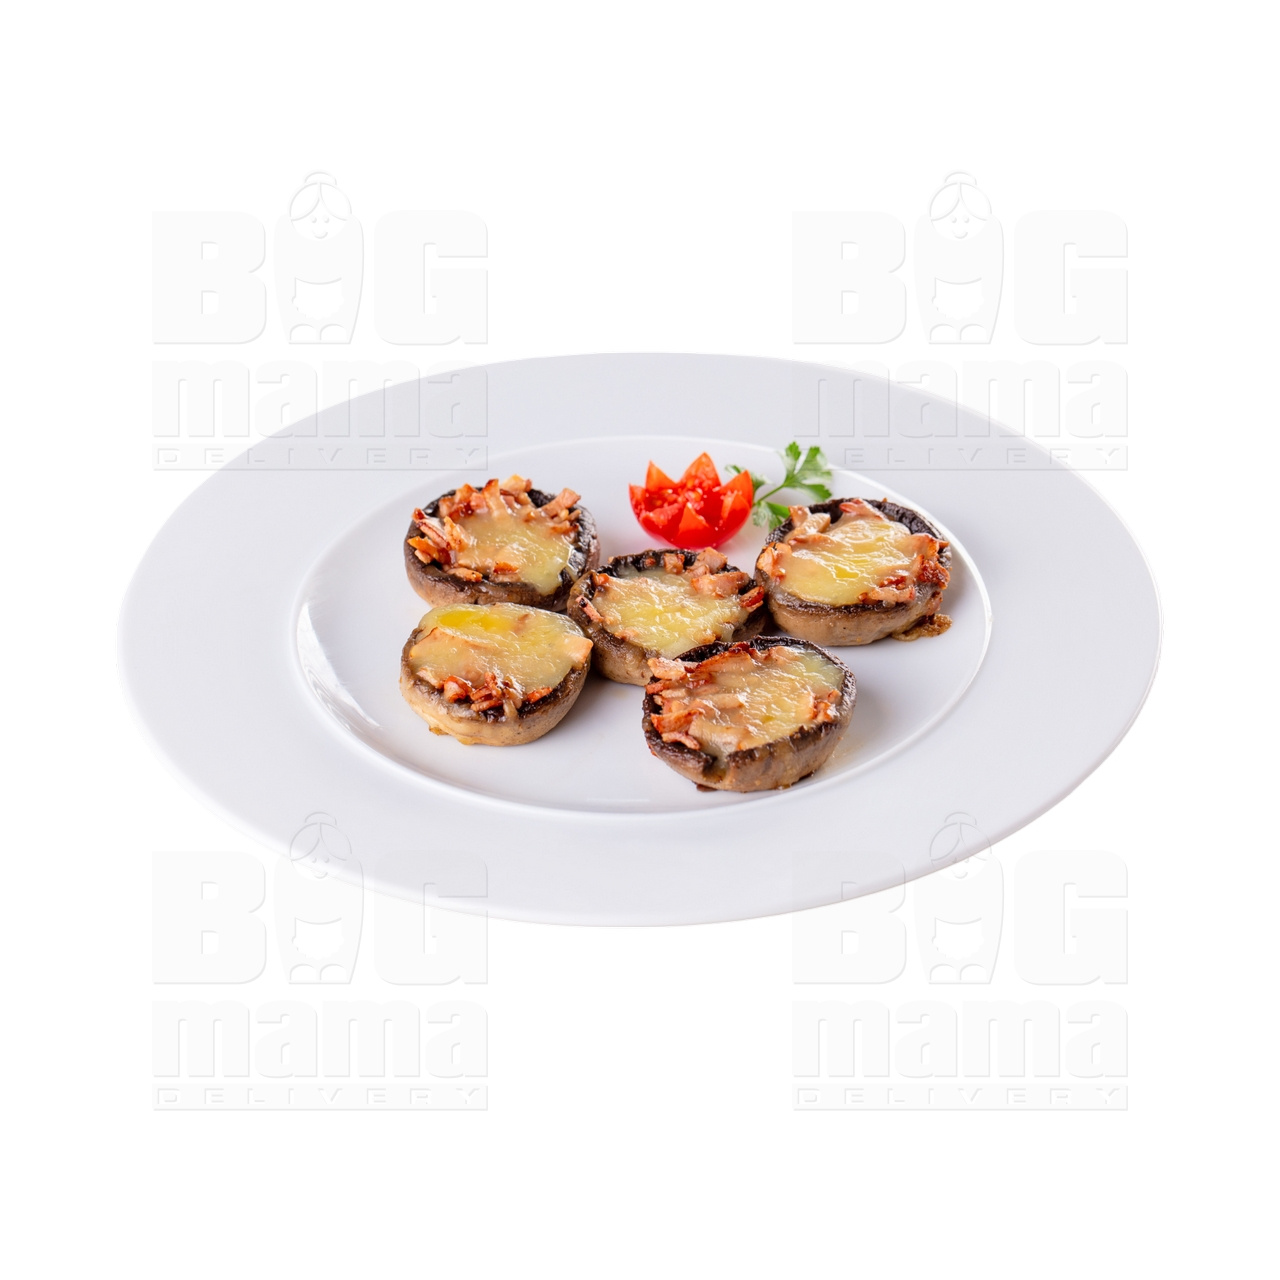 Product #265 image - Mushrooms uffed with cheese and ham